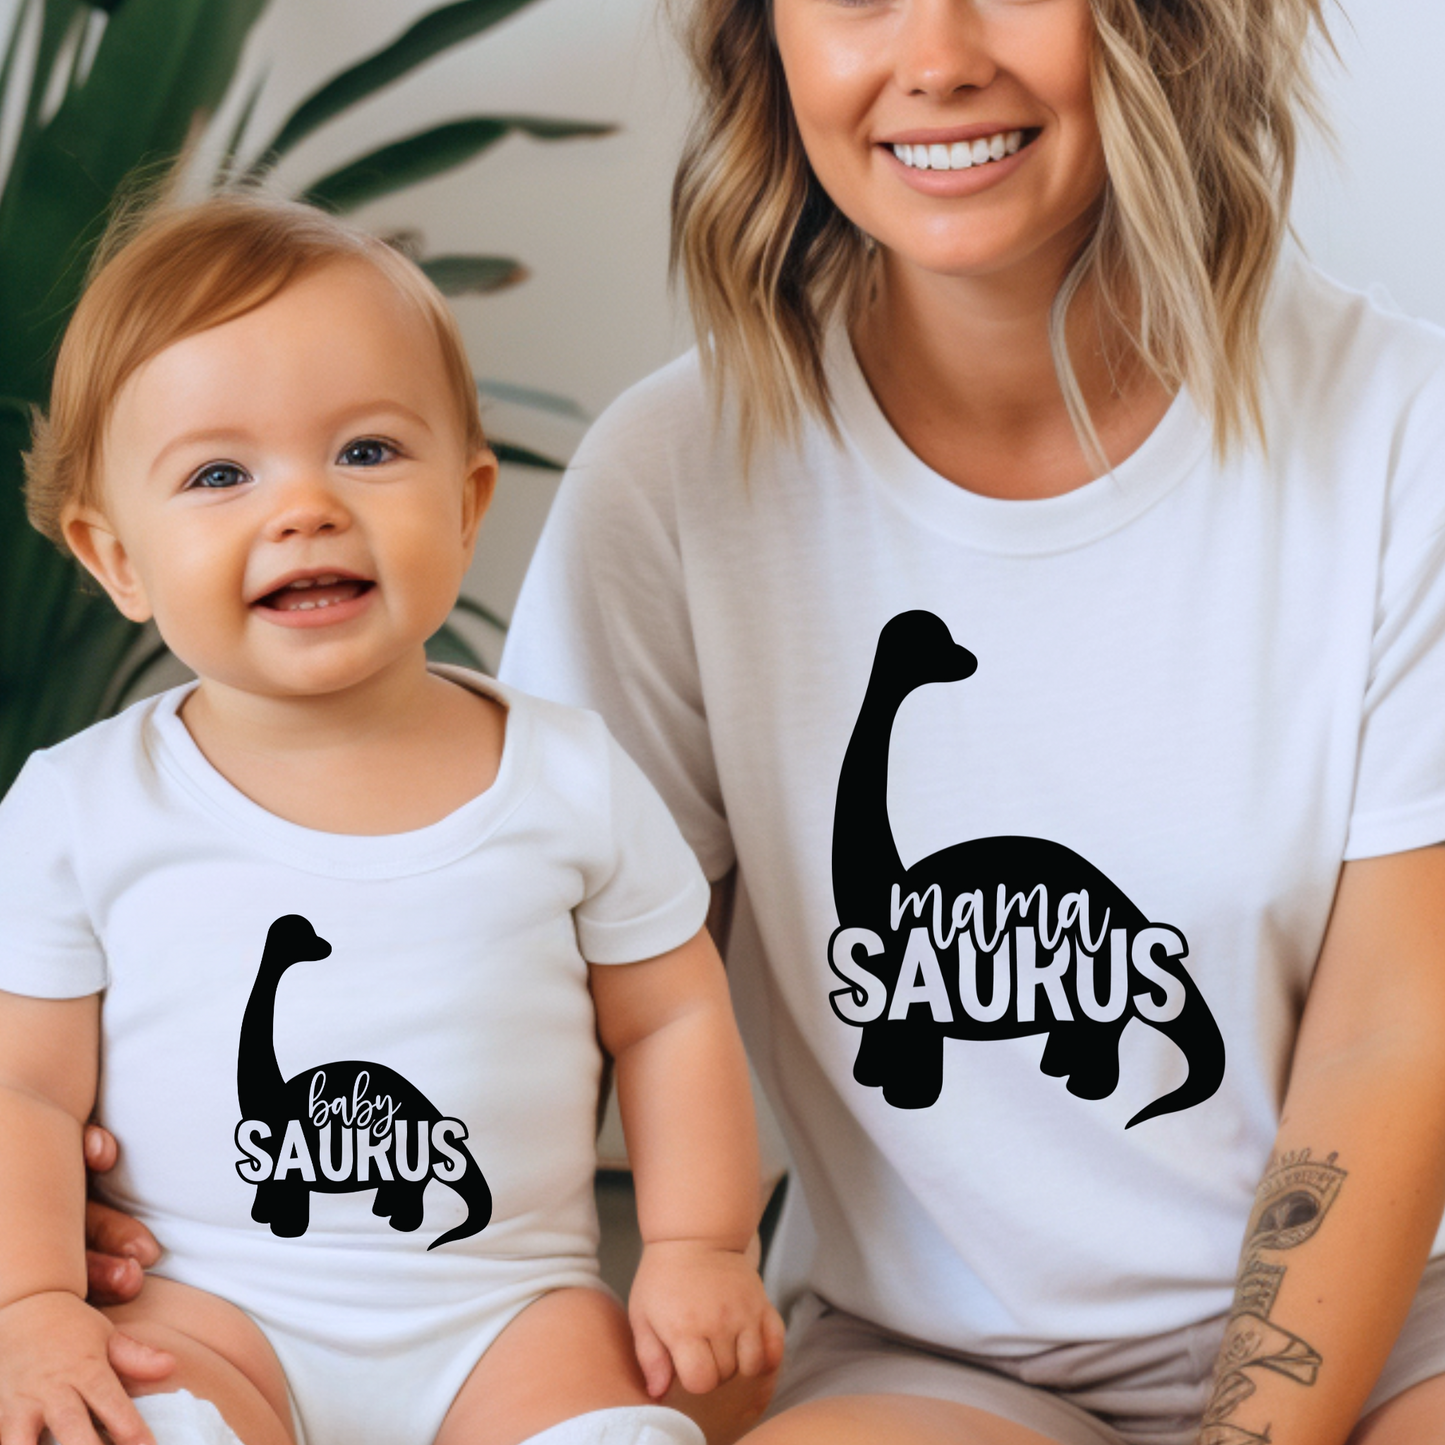 Mama and Baby Saurus - Mother Baby Matching Outfits